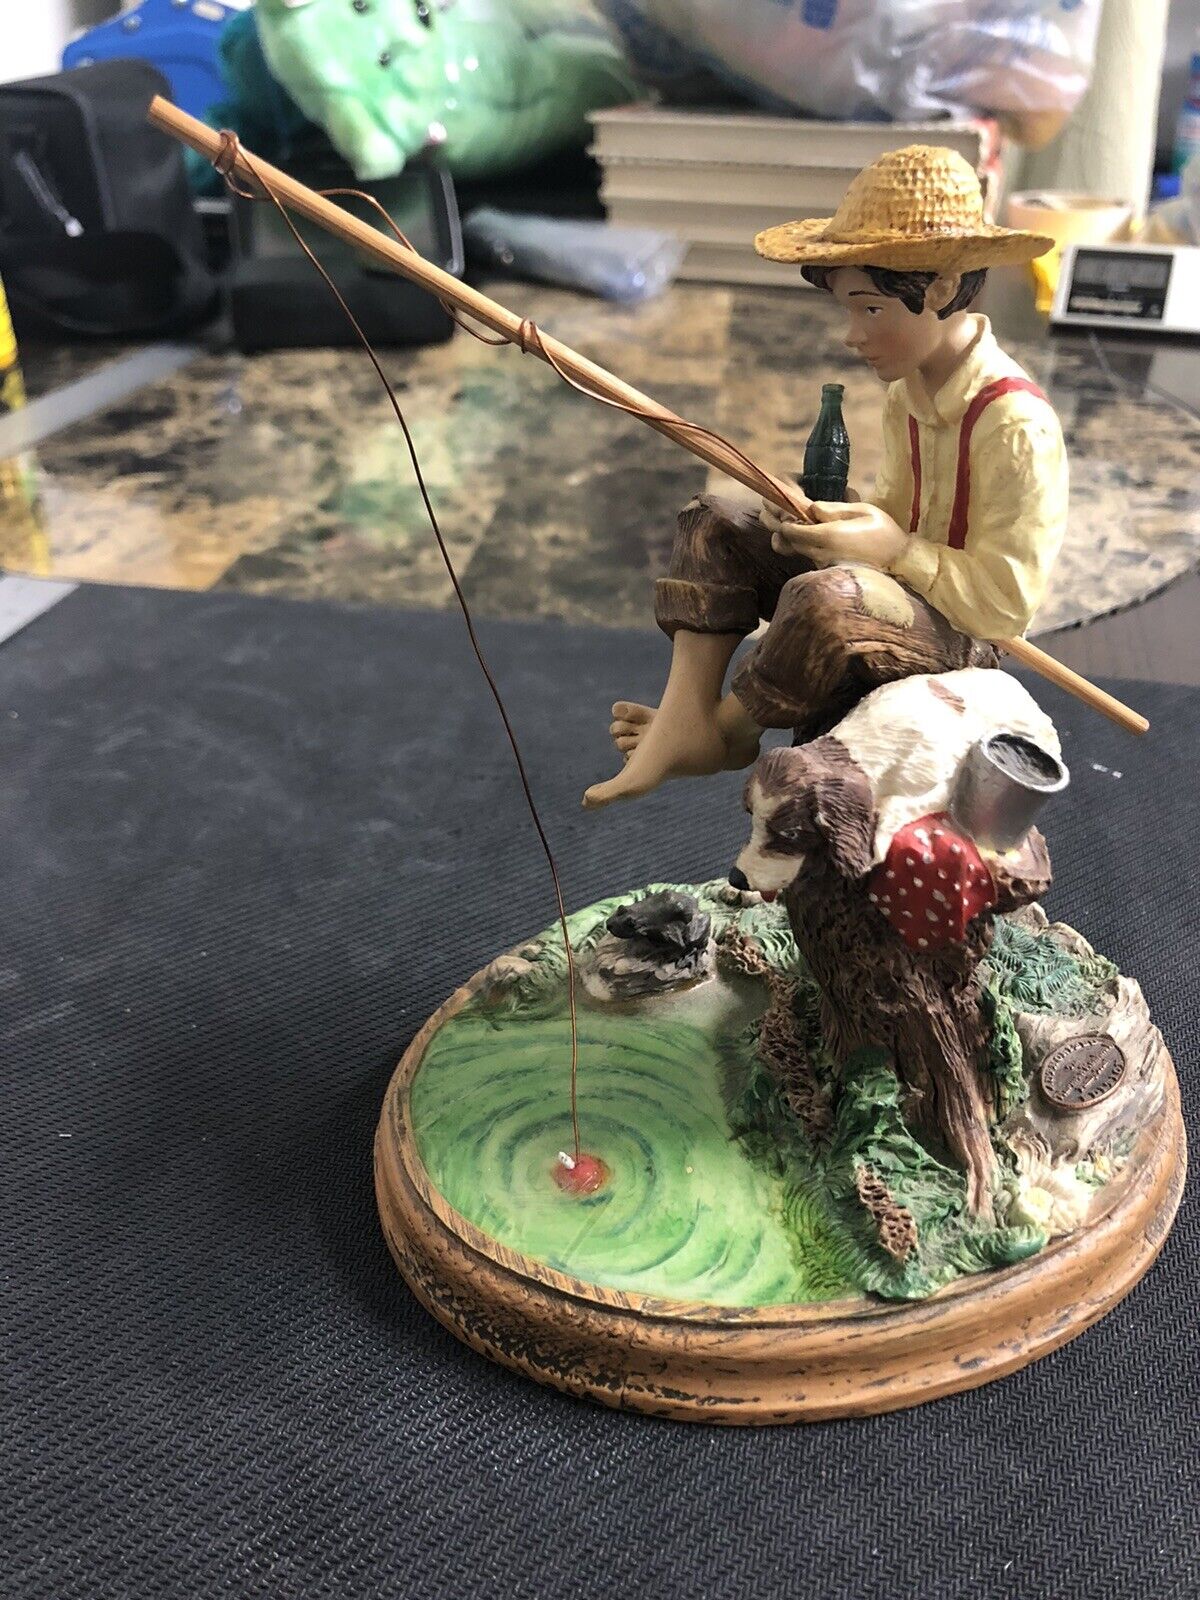 1991 Norman Rockwell BARK IF THEY BITE FIGURINE STAMPED NO. 1749A